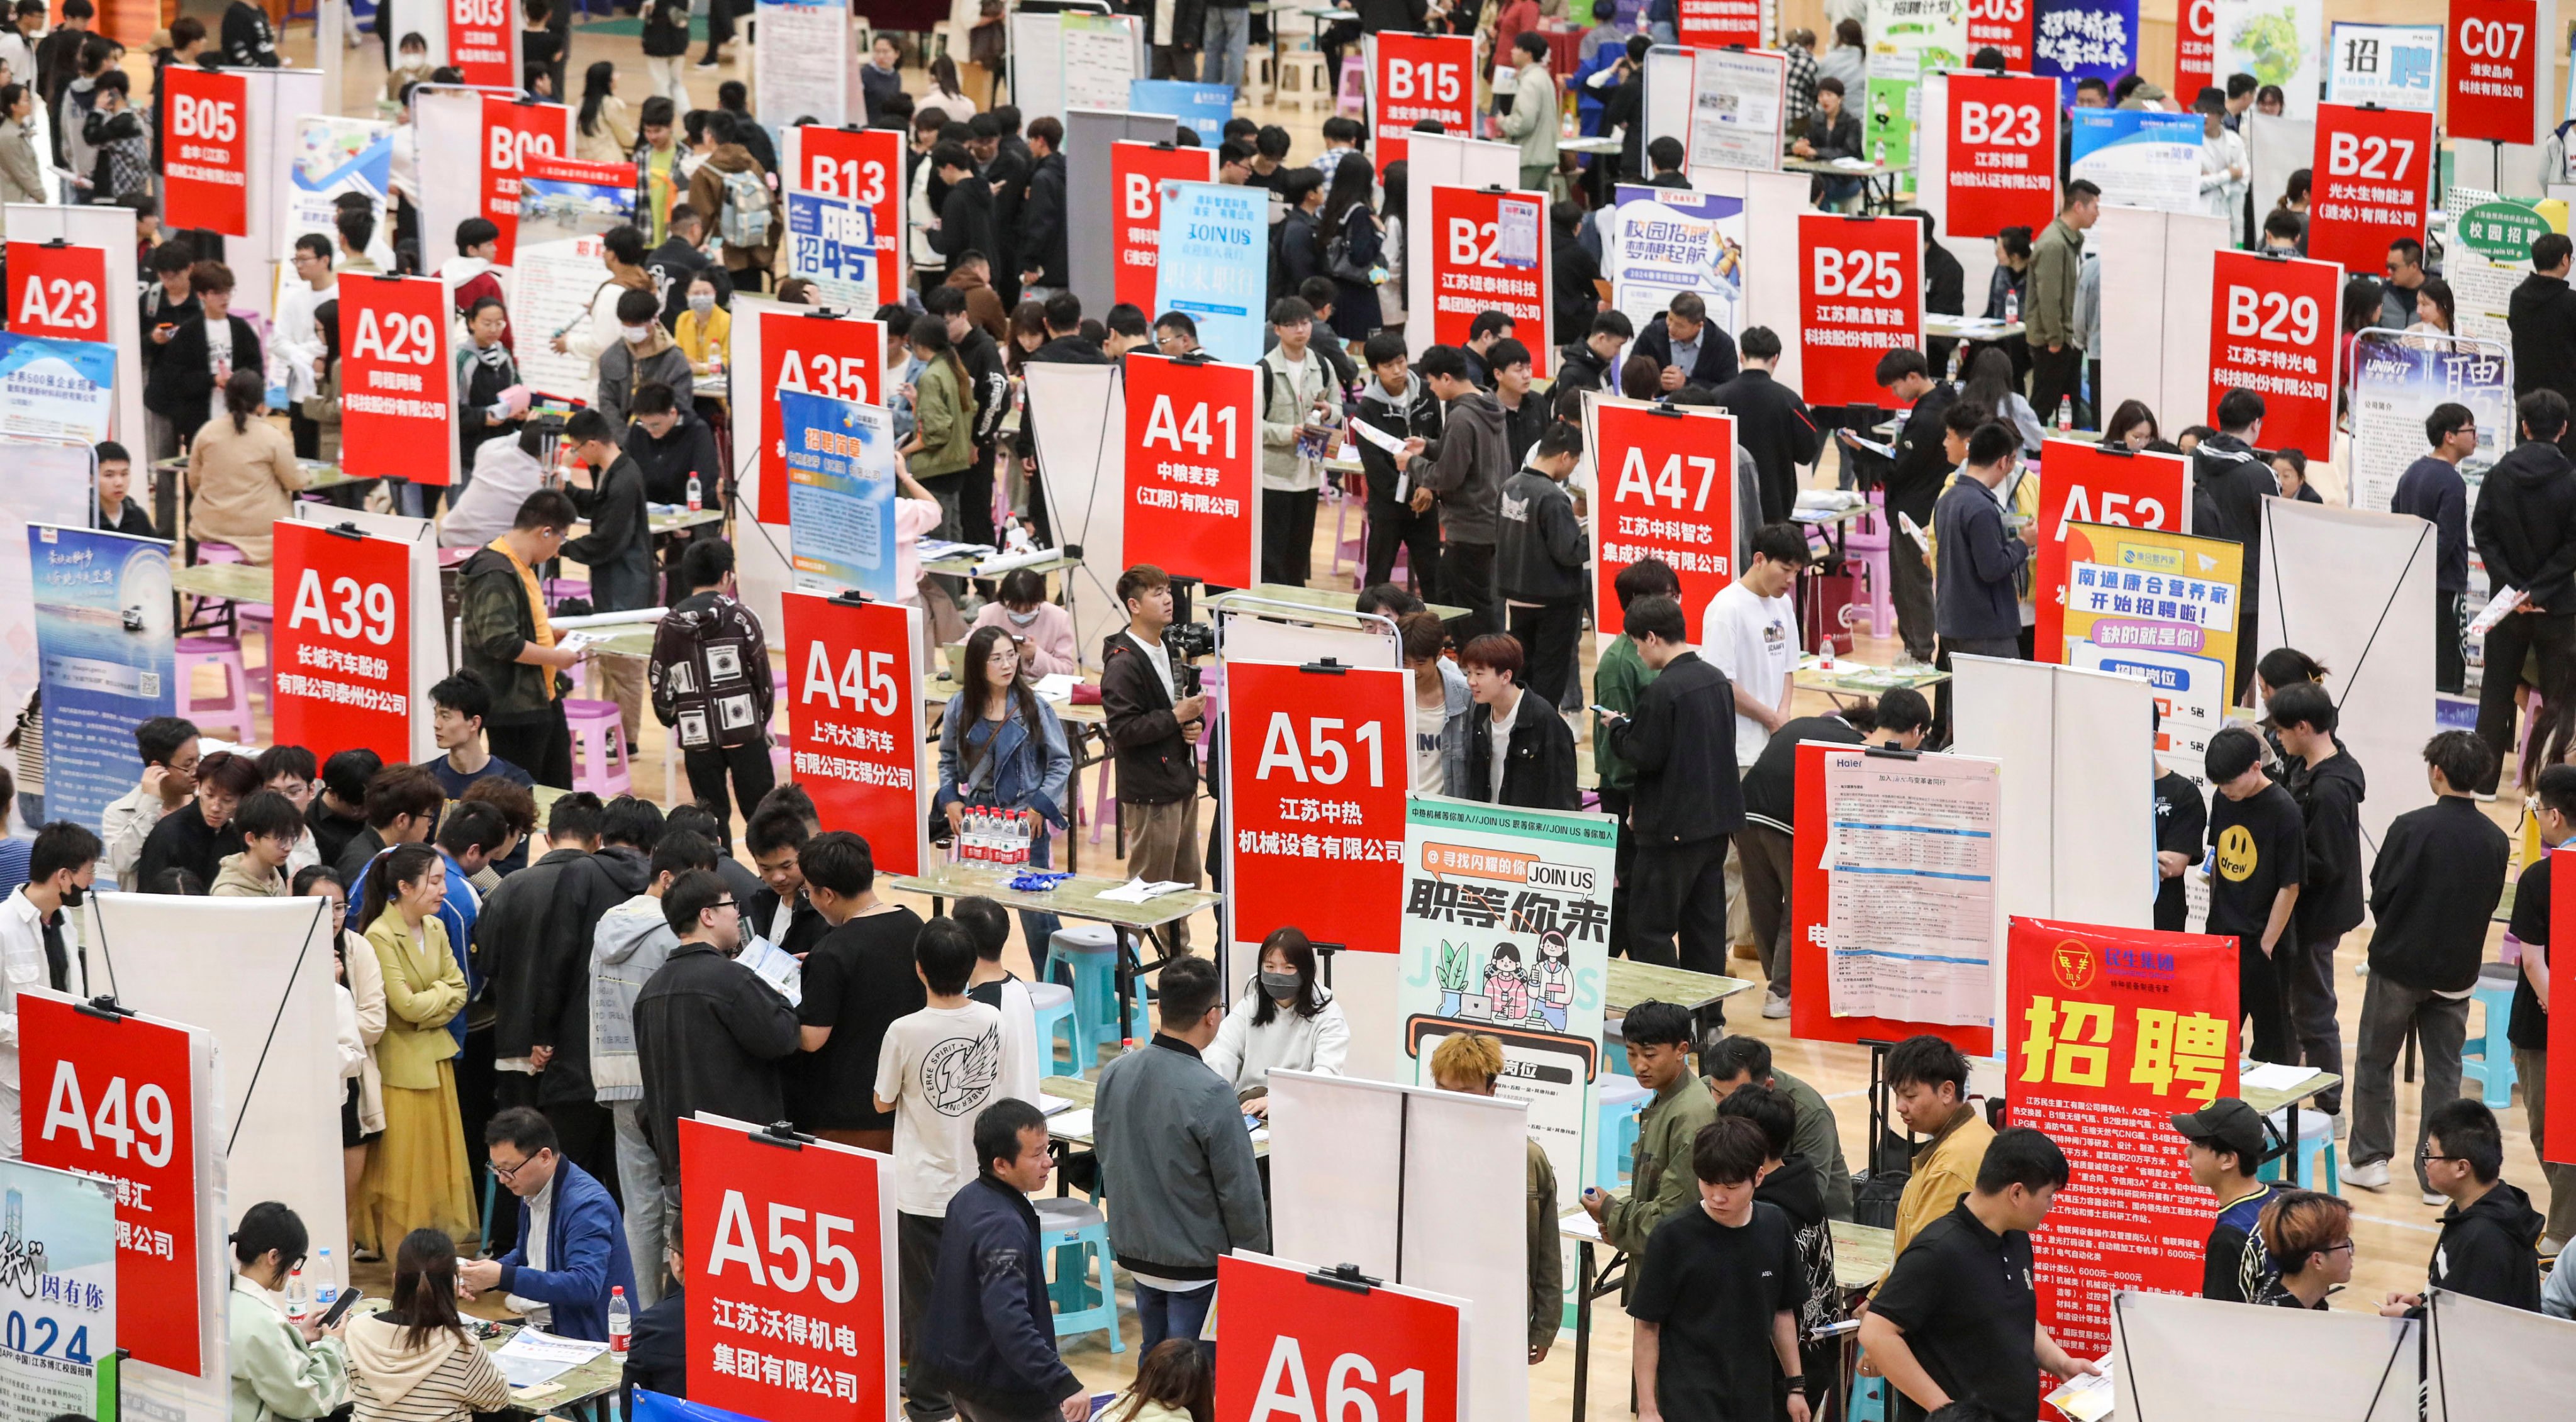 Students attend a campus job fair in the east China city of Huai’an on April 27. Photo: NurPhoto via Getty Images